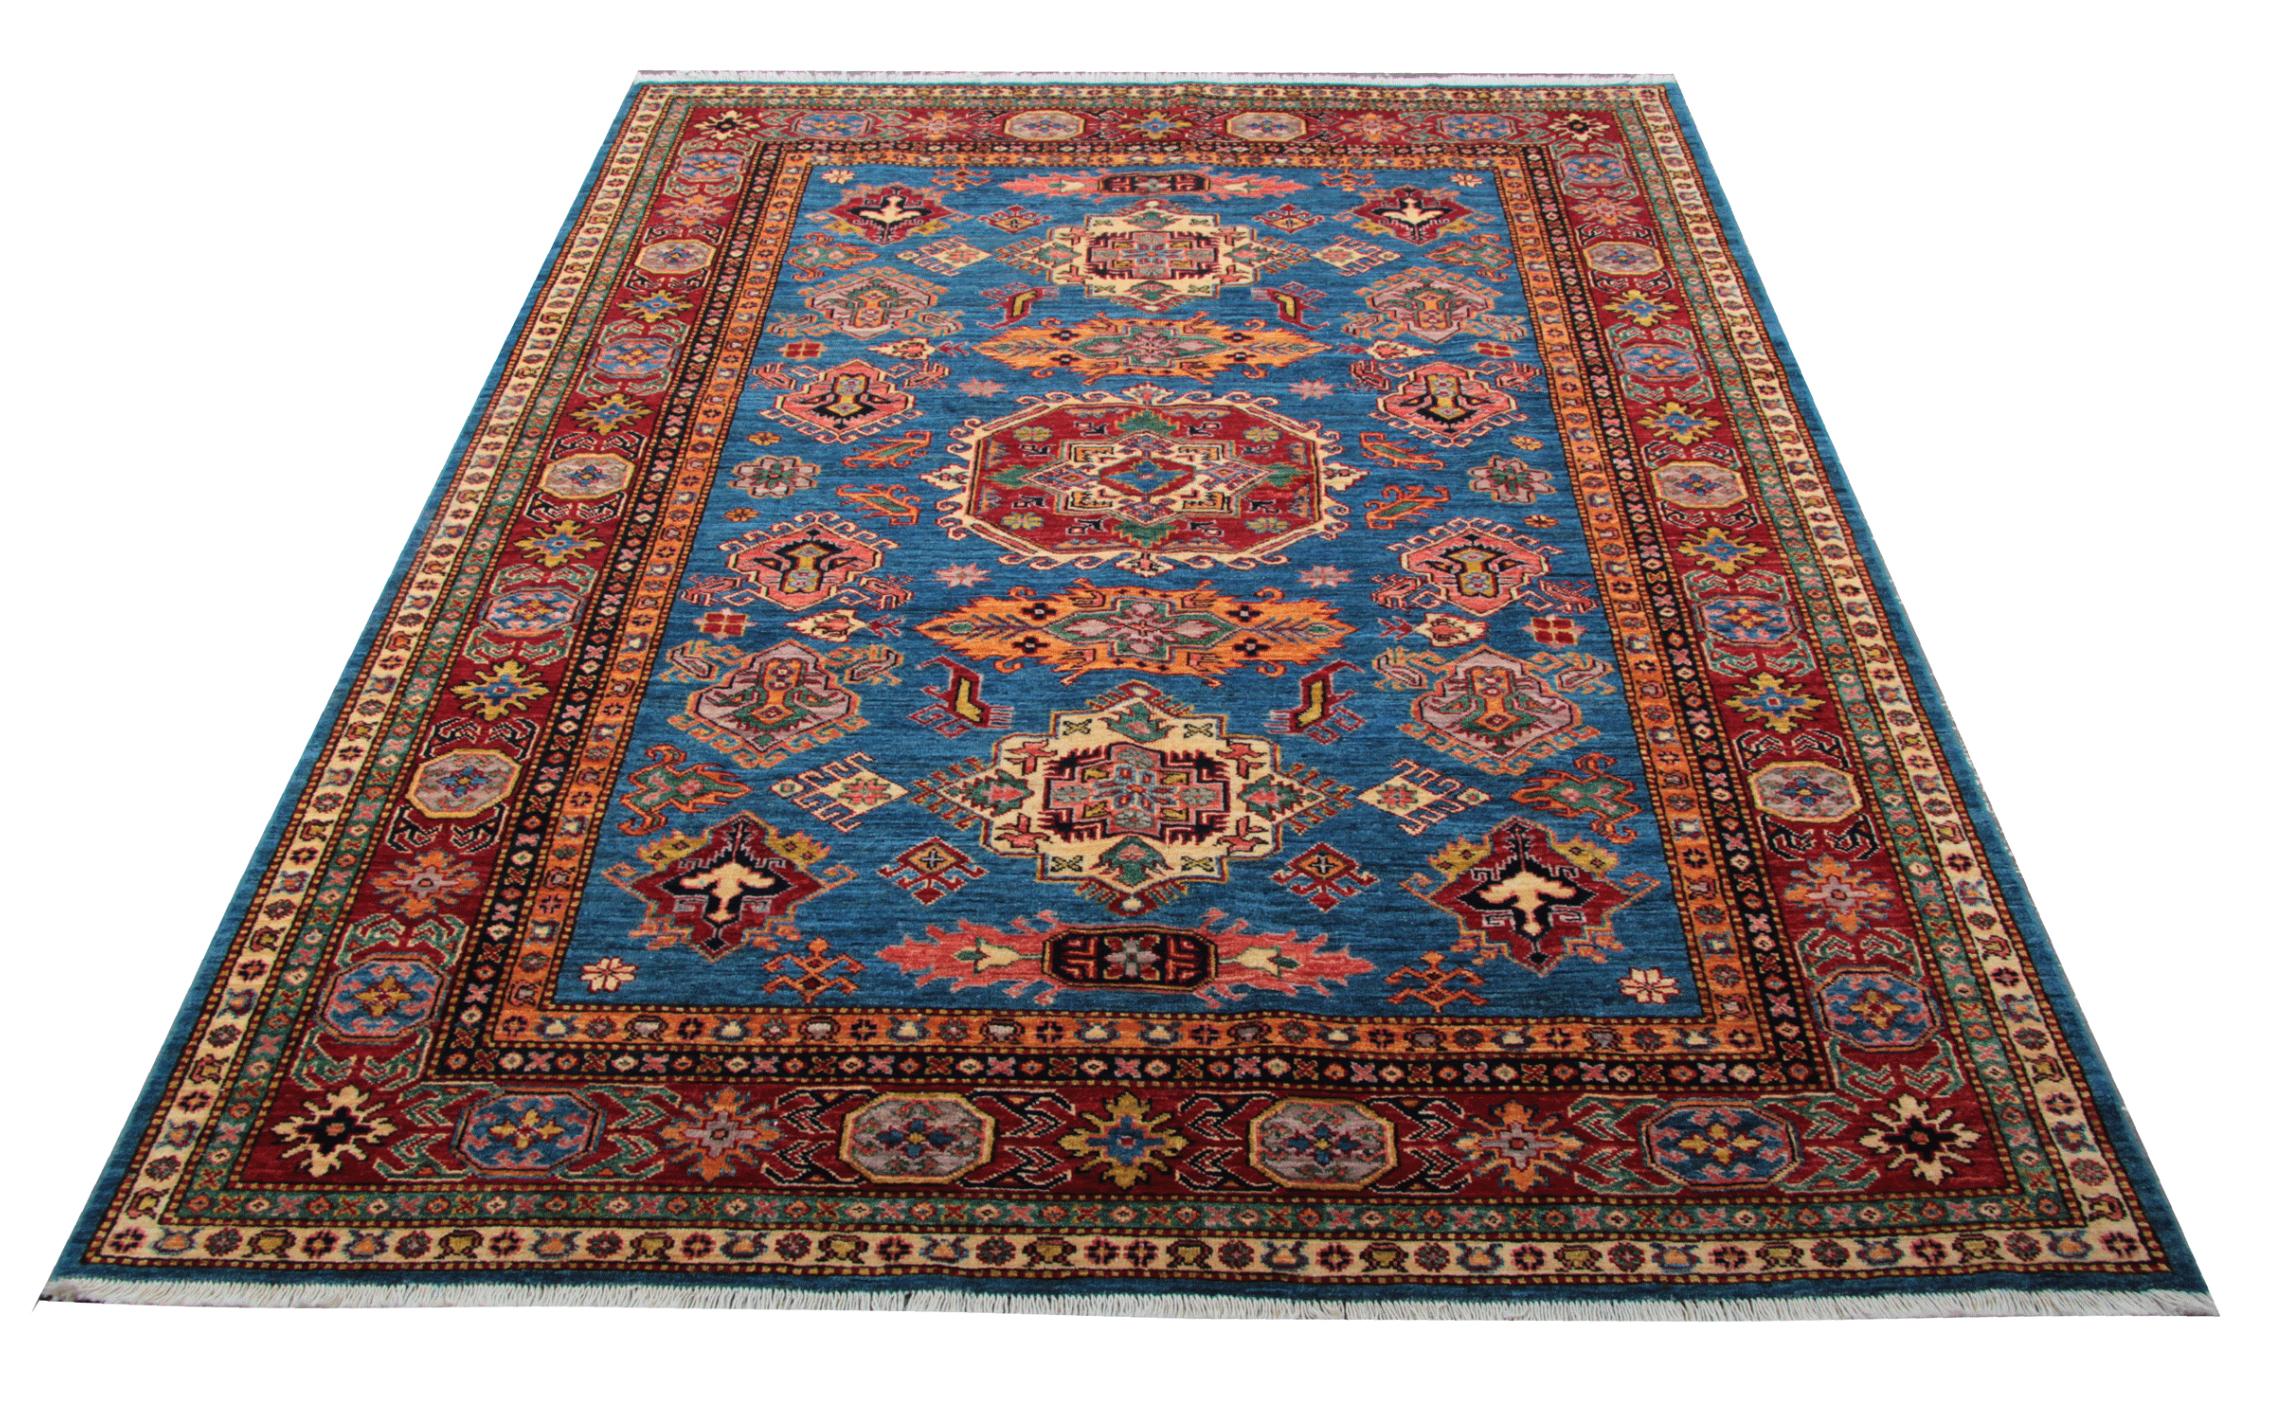 A beautiful new traditional Afghan Kazak rug, featuring a traditional tribal medallion design woven in accents of red, orange, and cream, through the center on an aqua blue field. The geometric rug design is then finished with a highly-detailed